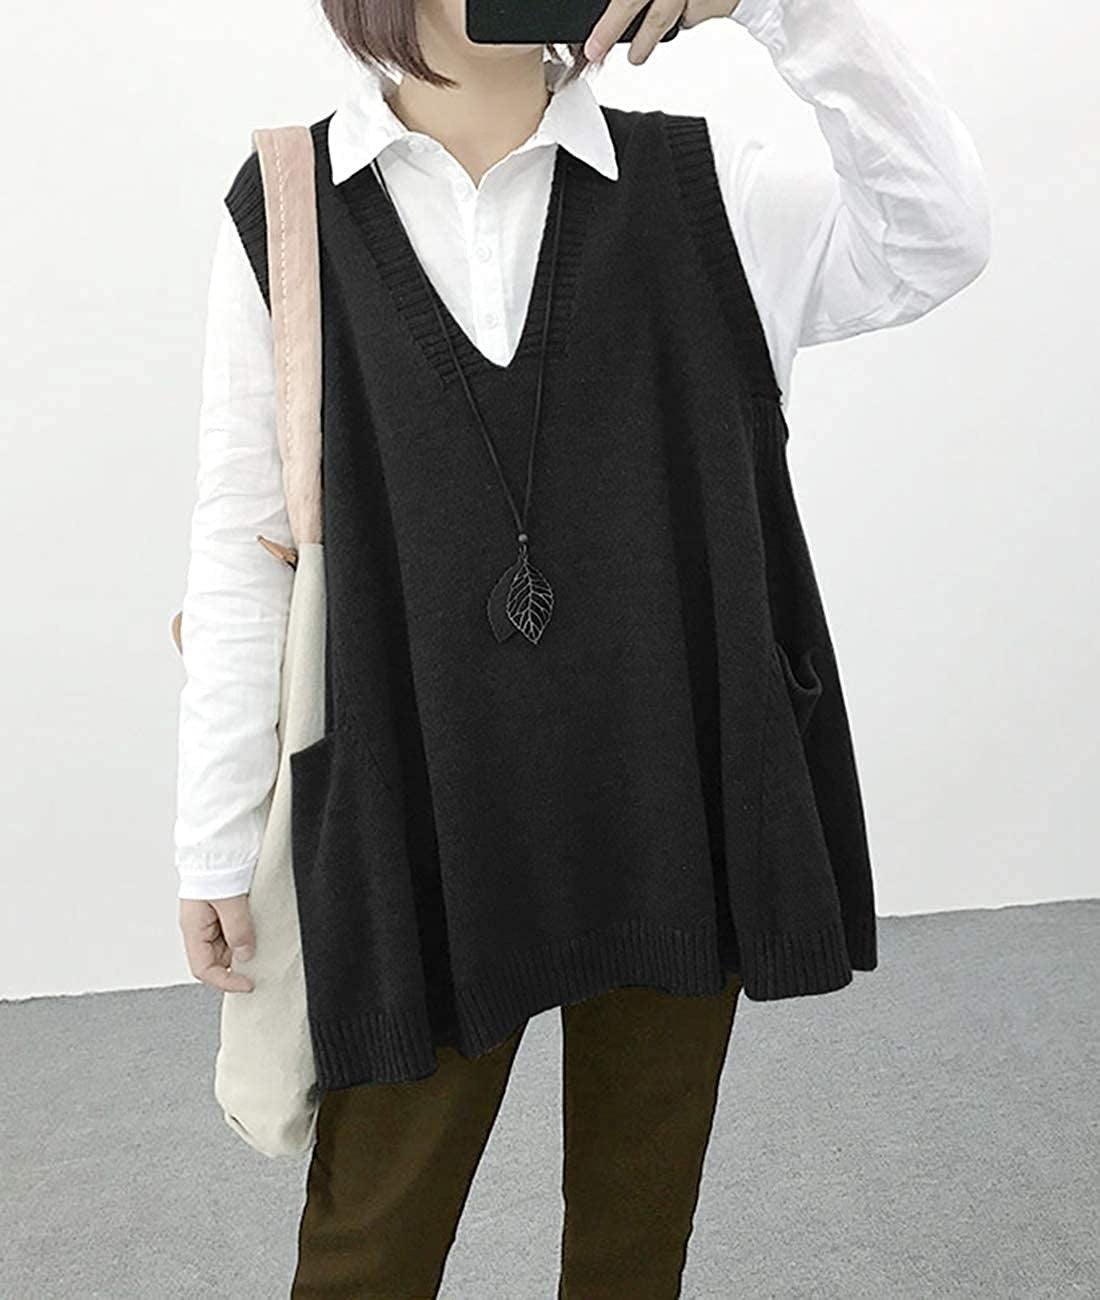 A model wearing the oversized gray sweater vest over a white button down